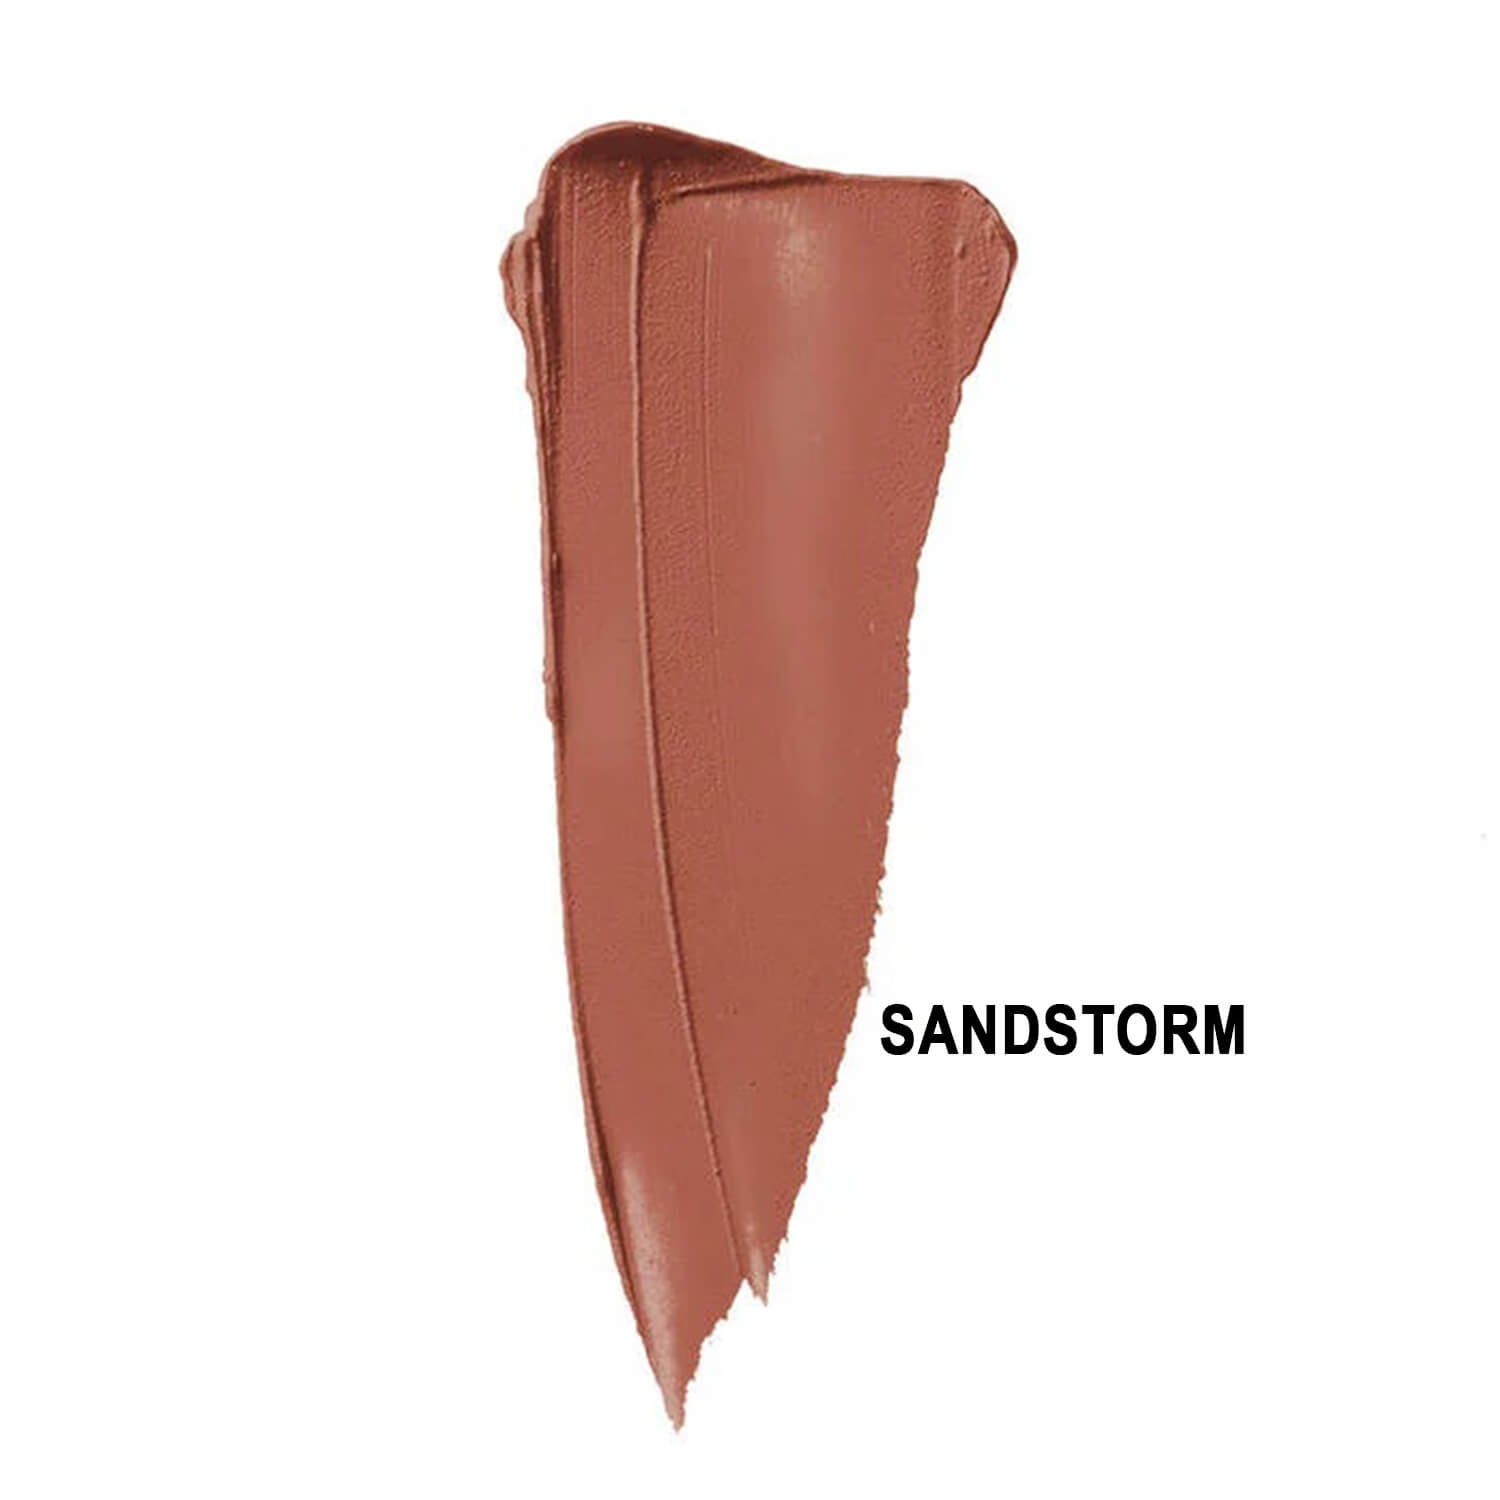 NYX Liquid Suede Cream Lipstick swatch of sandstorm available at Heygirl.pk for delivery in Pakistan